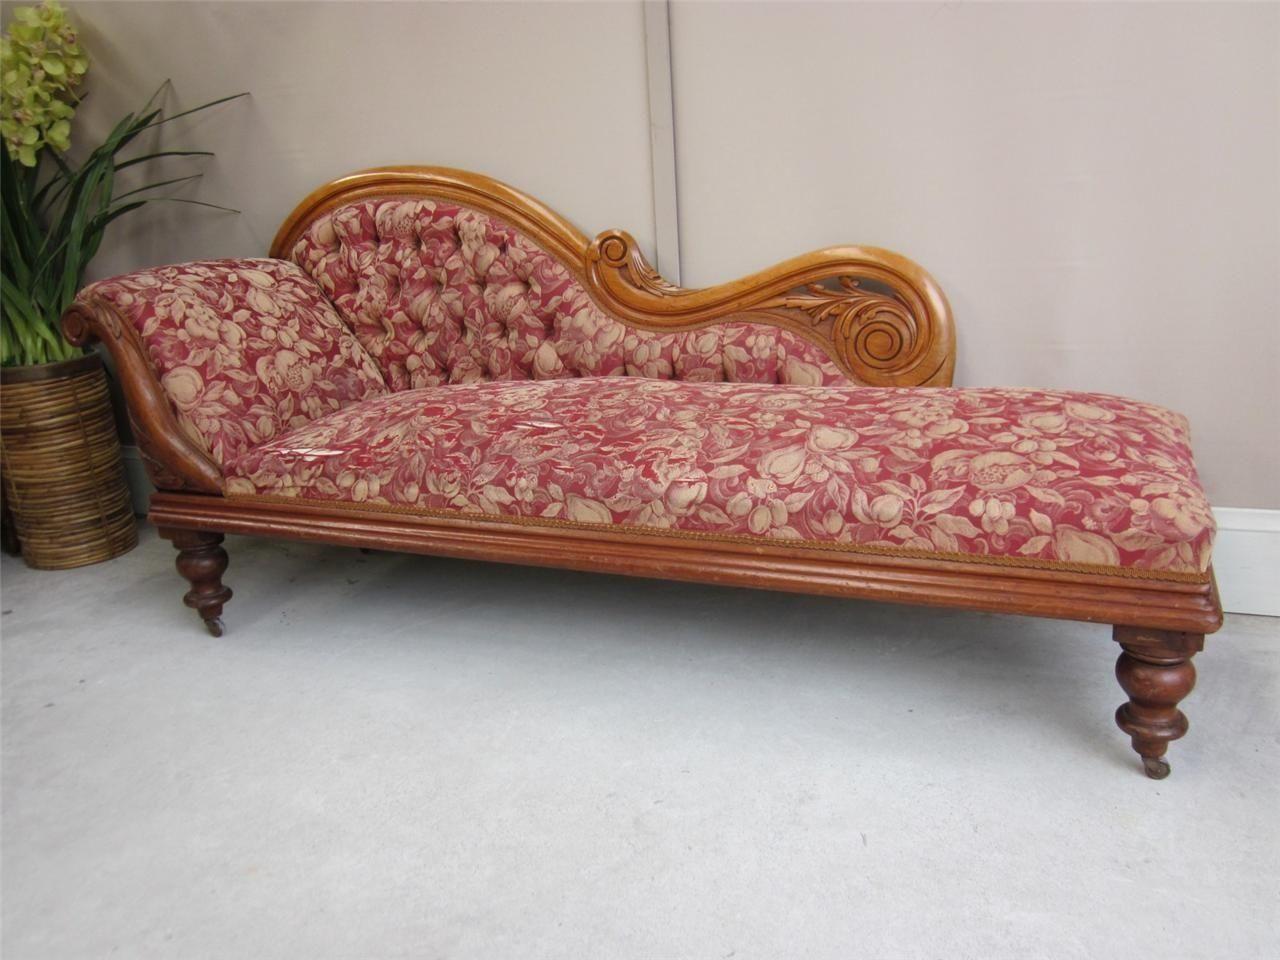 Antique Leather Sofa Bed | Tehranmix Decoration Throughout Old Fashioned Sofas (View 6 of 20)